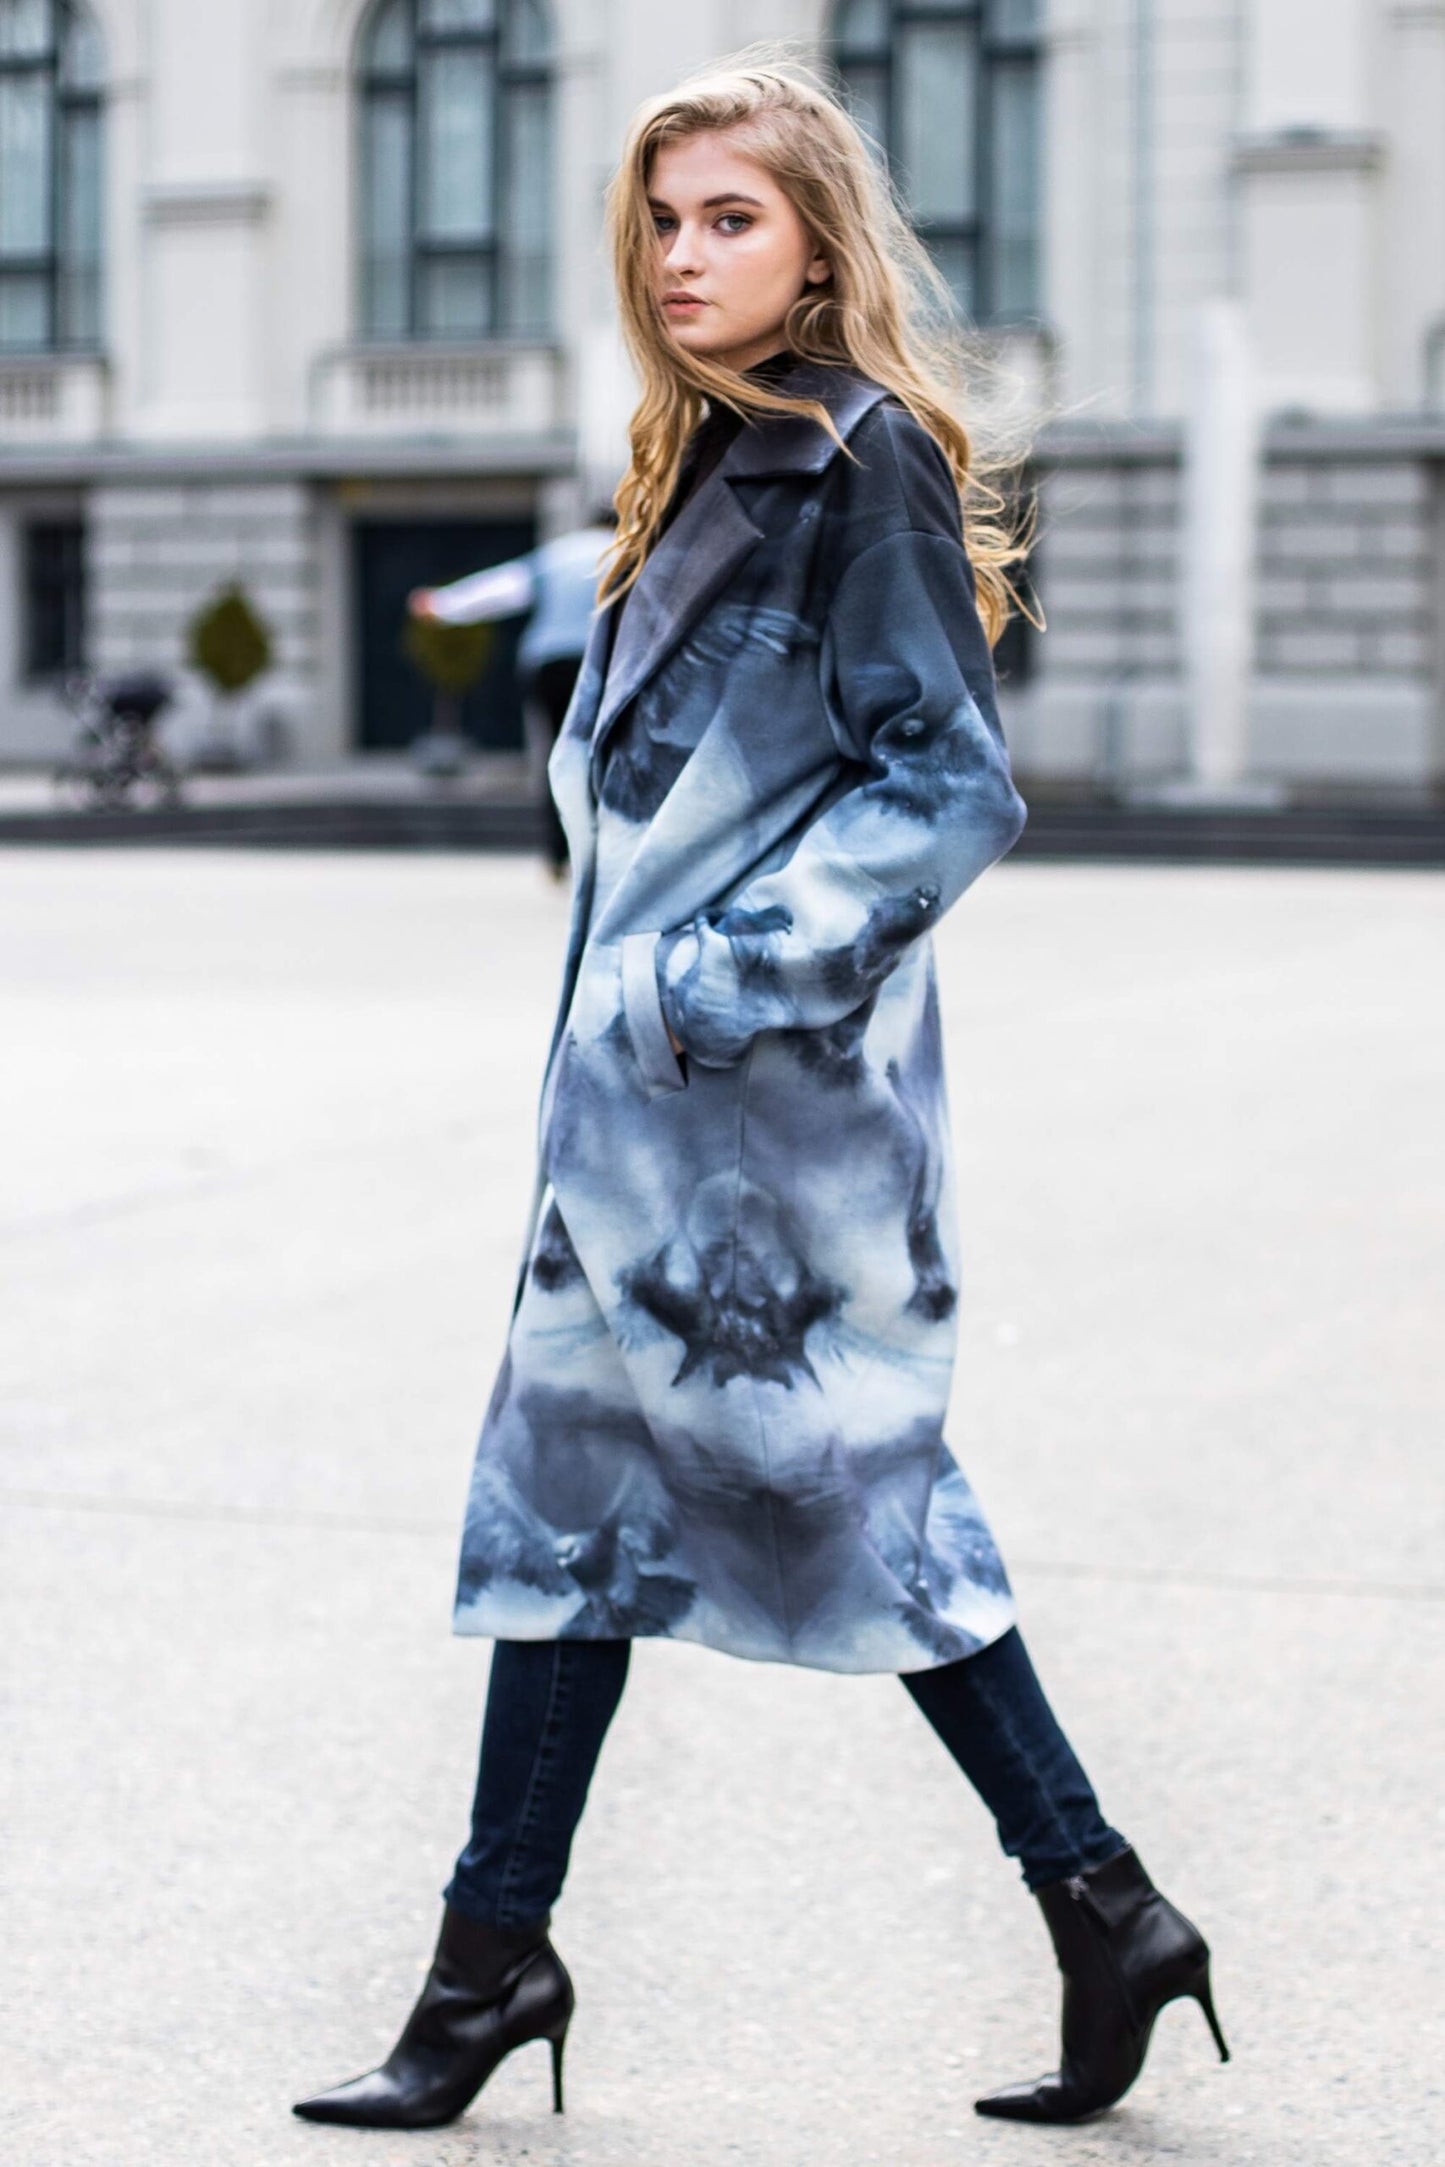 Oversize classic coat with painted pigeon print